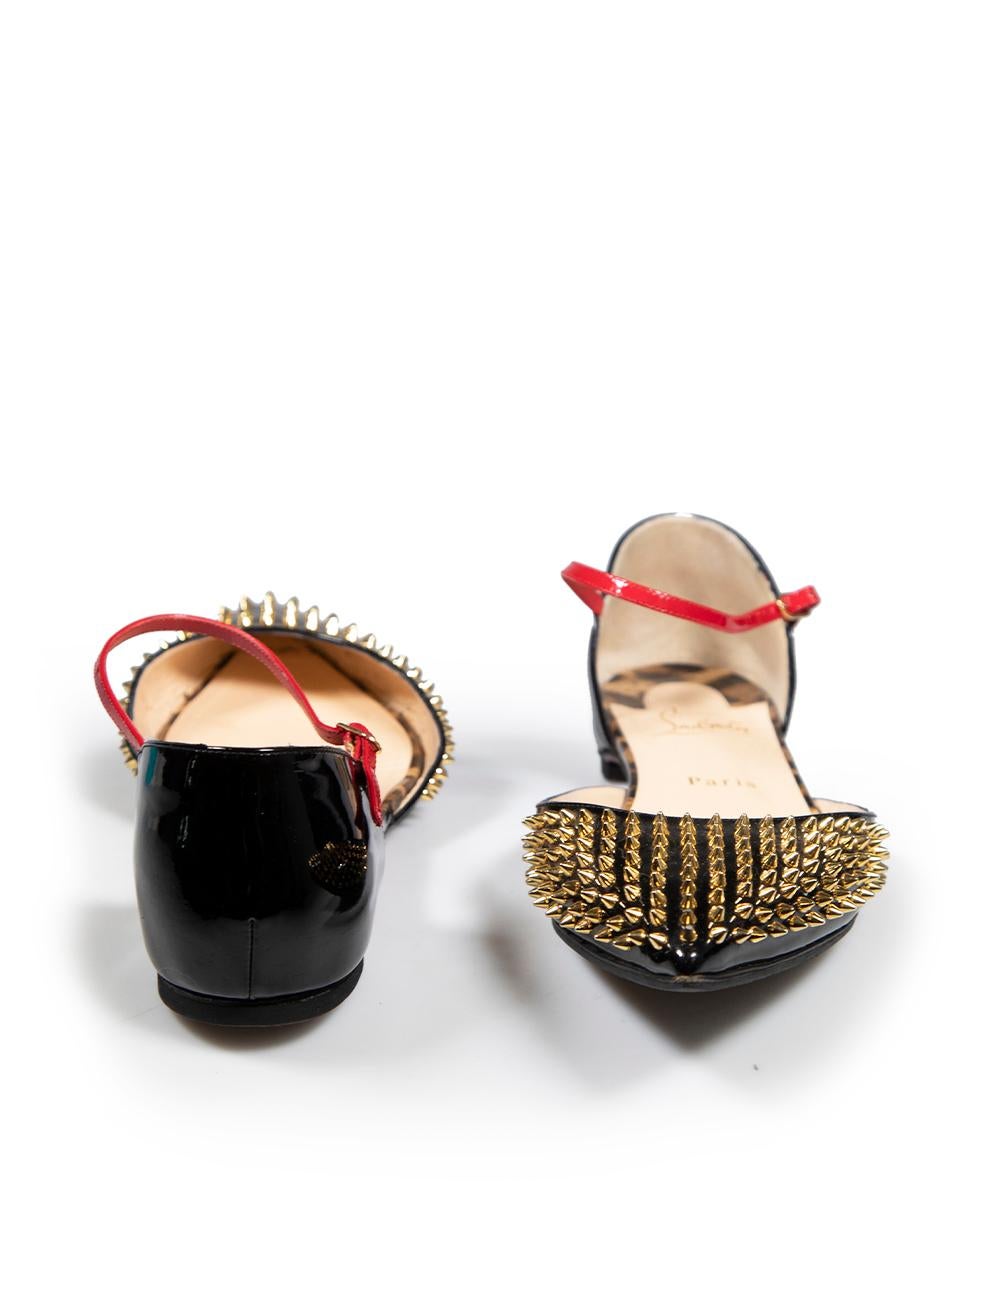 Christian Louboutin Black Patent Baila Spike Flats Size IT 39.5 In Good Condition For Sale In London, GB